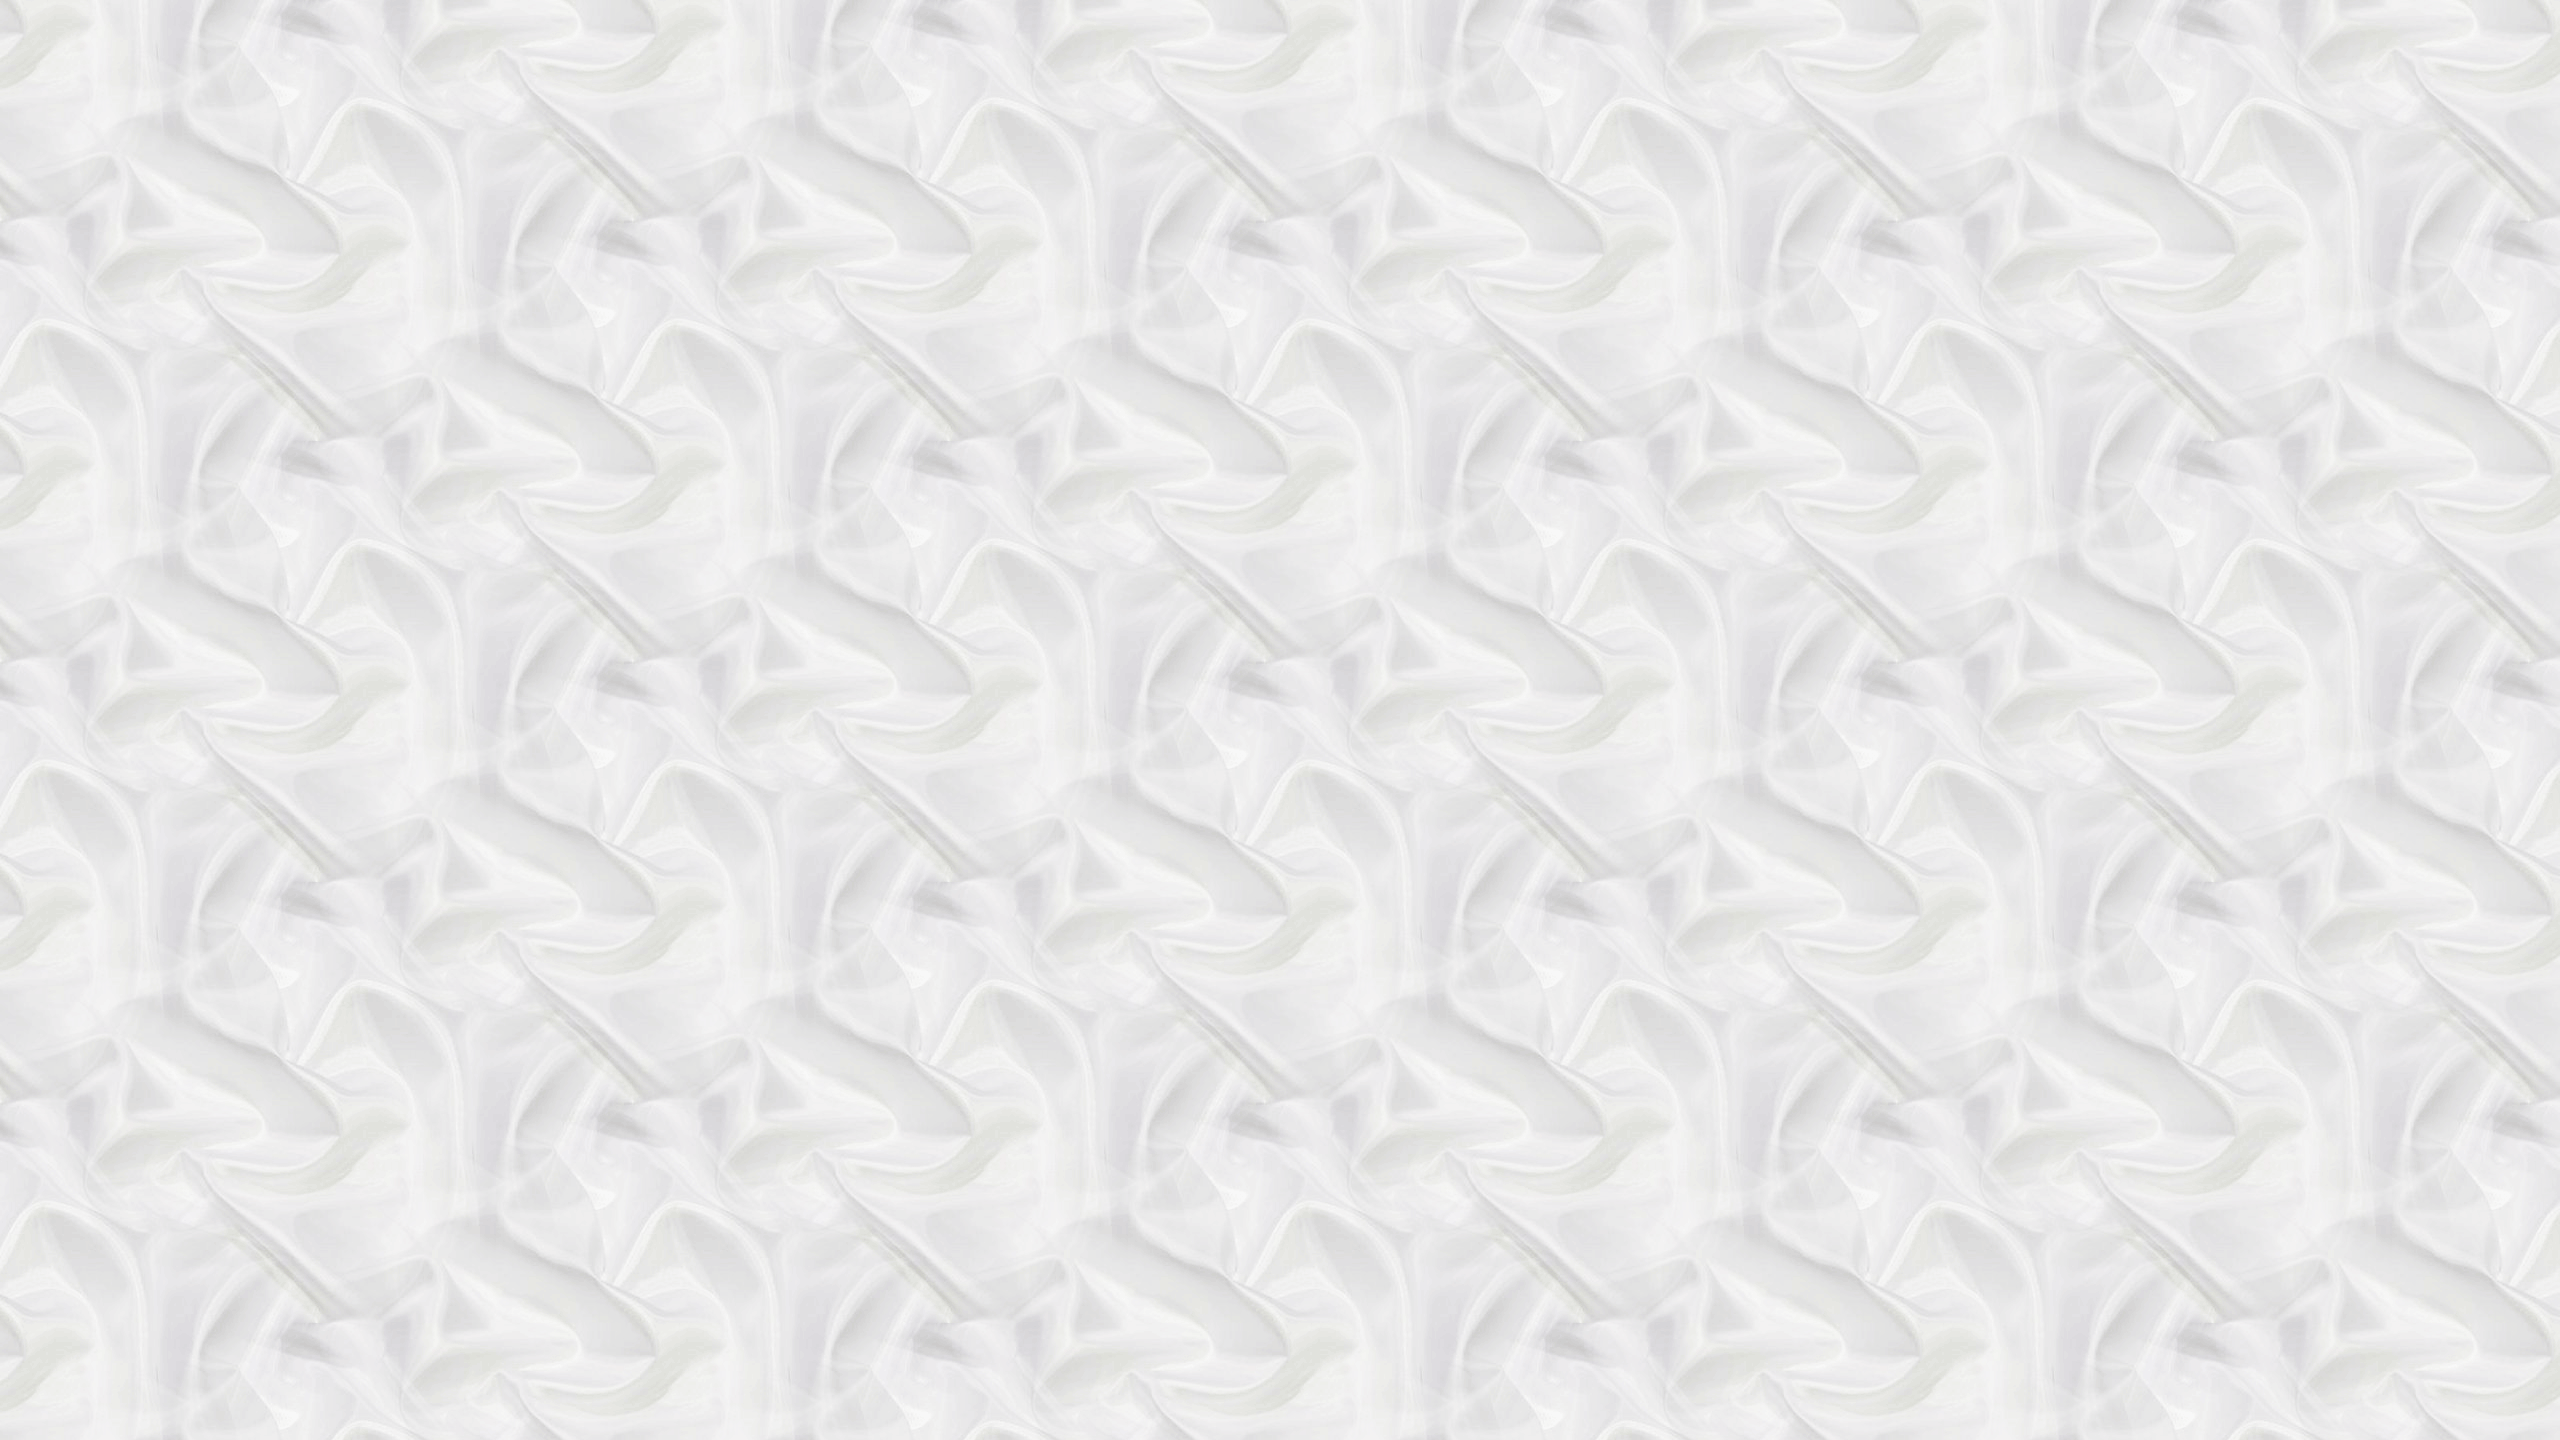 This White Silk Desktop Wallpaper Is Easy Just Save The